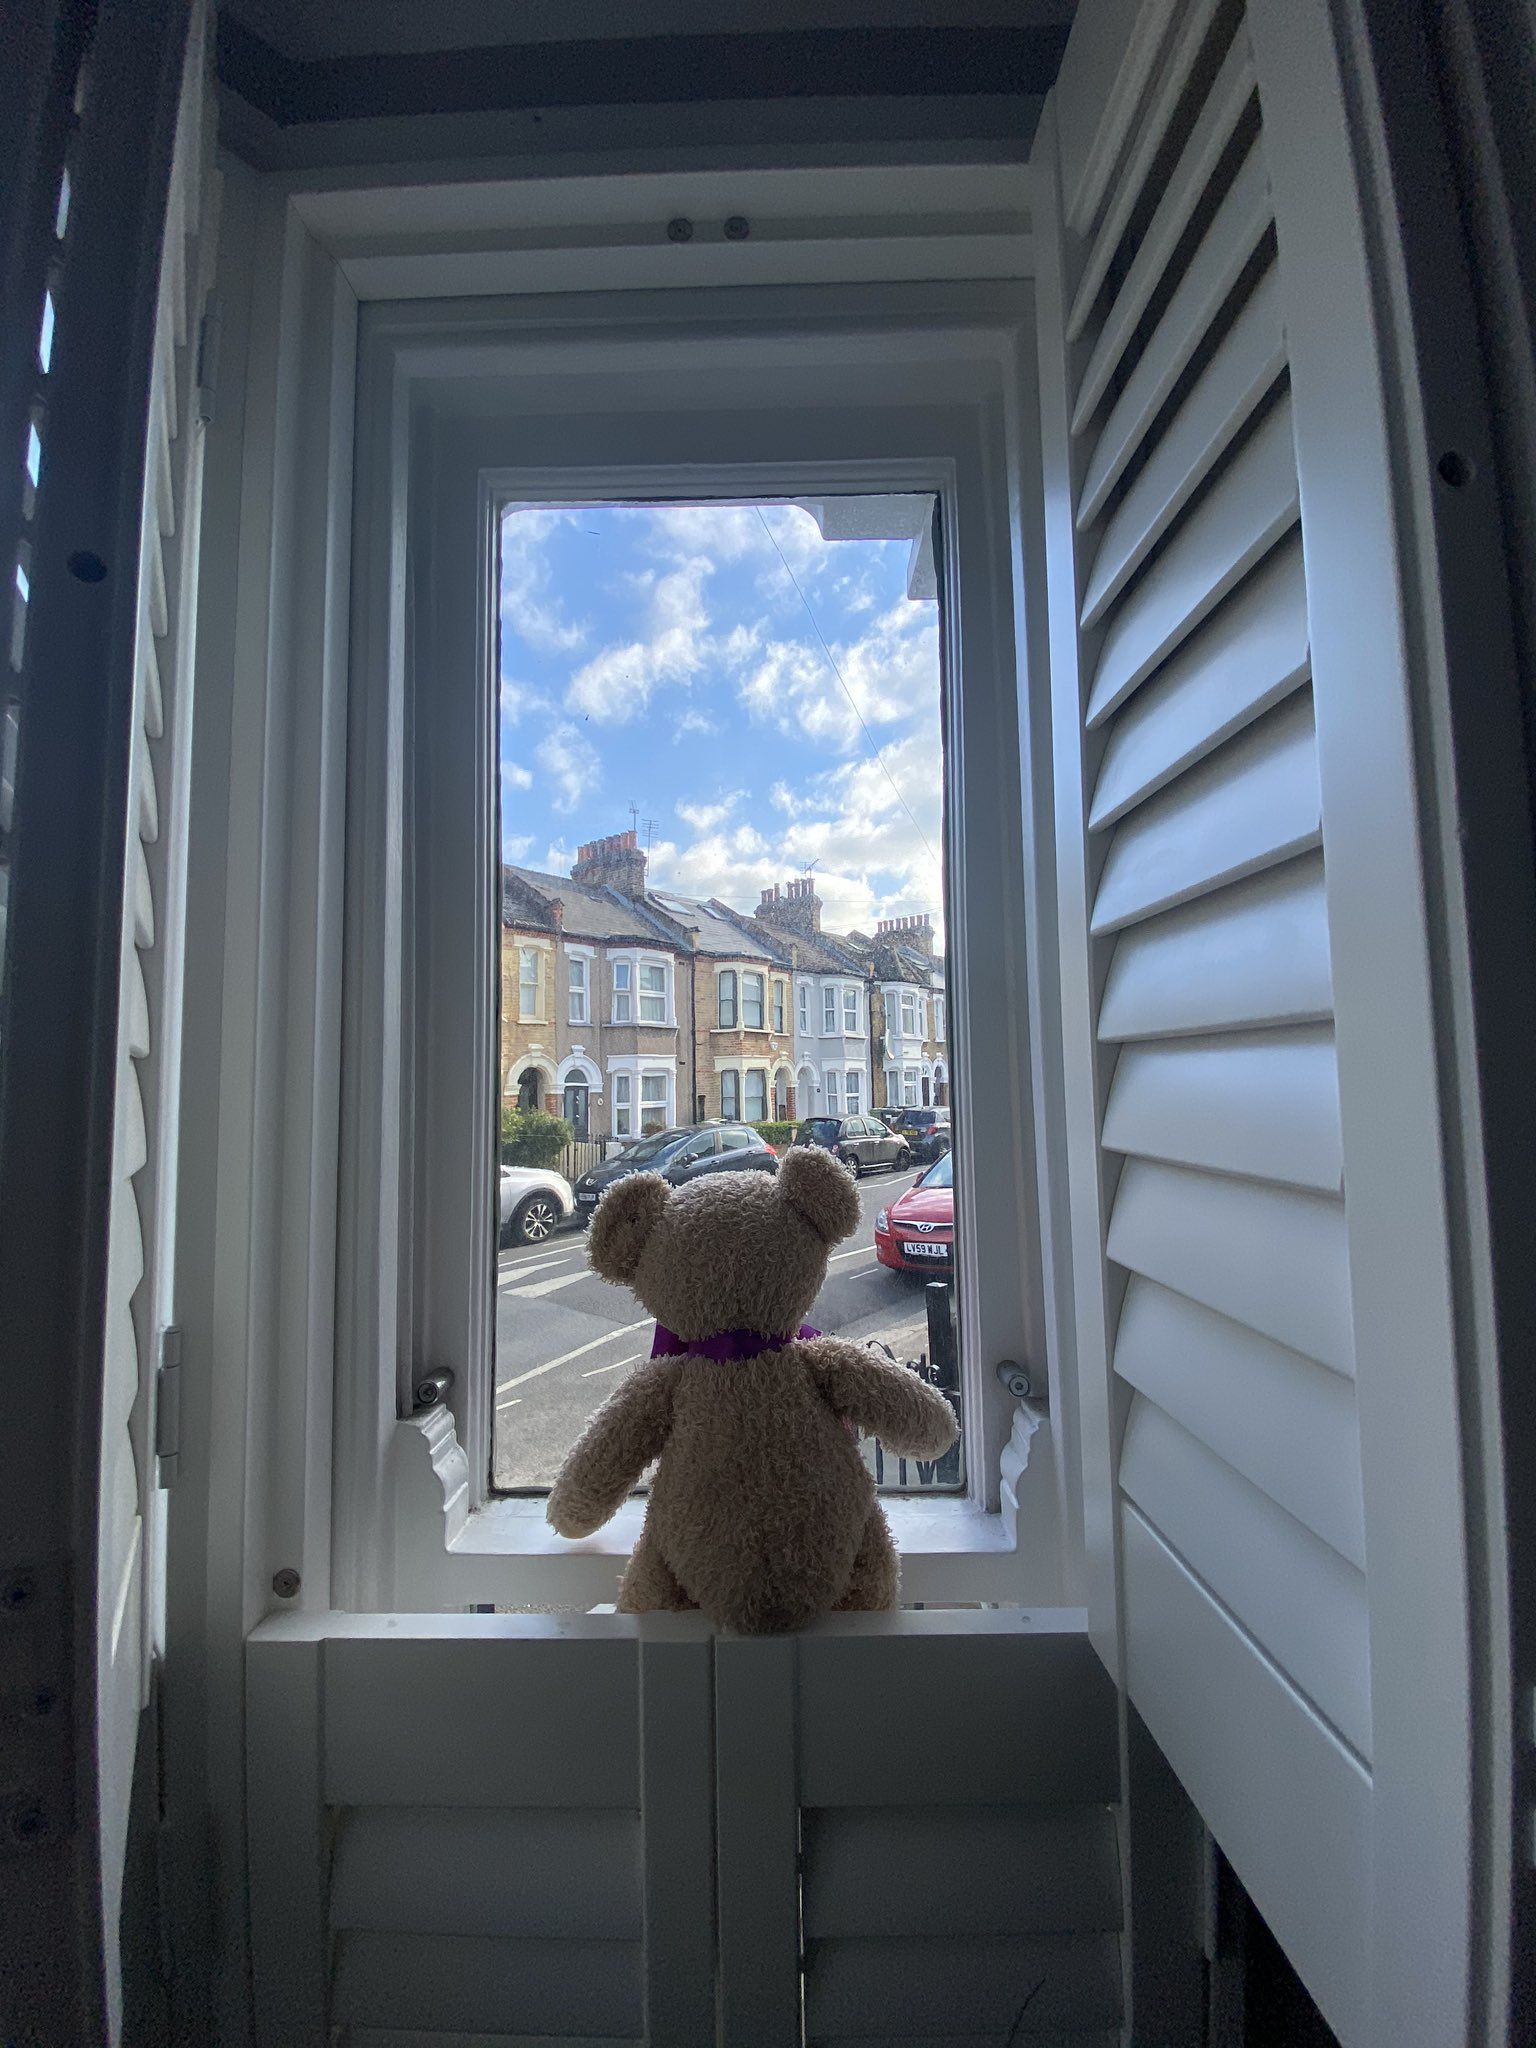 Waiting to greet the children of the neighborhood. 💕 Is anyone else  participating in the great bear hunt? #bearhunt #COVID19